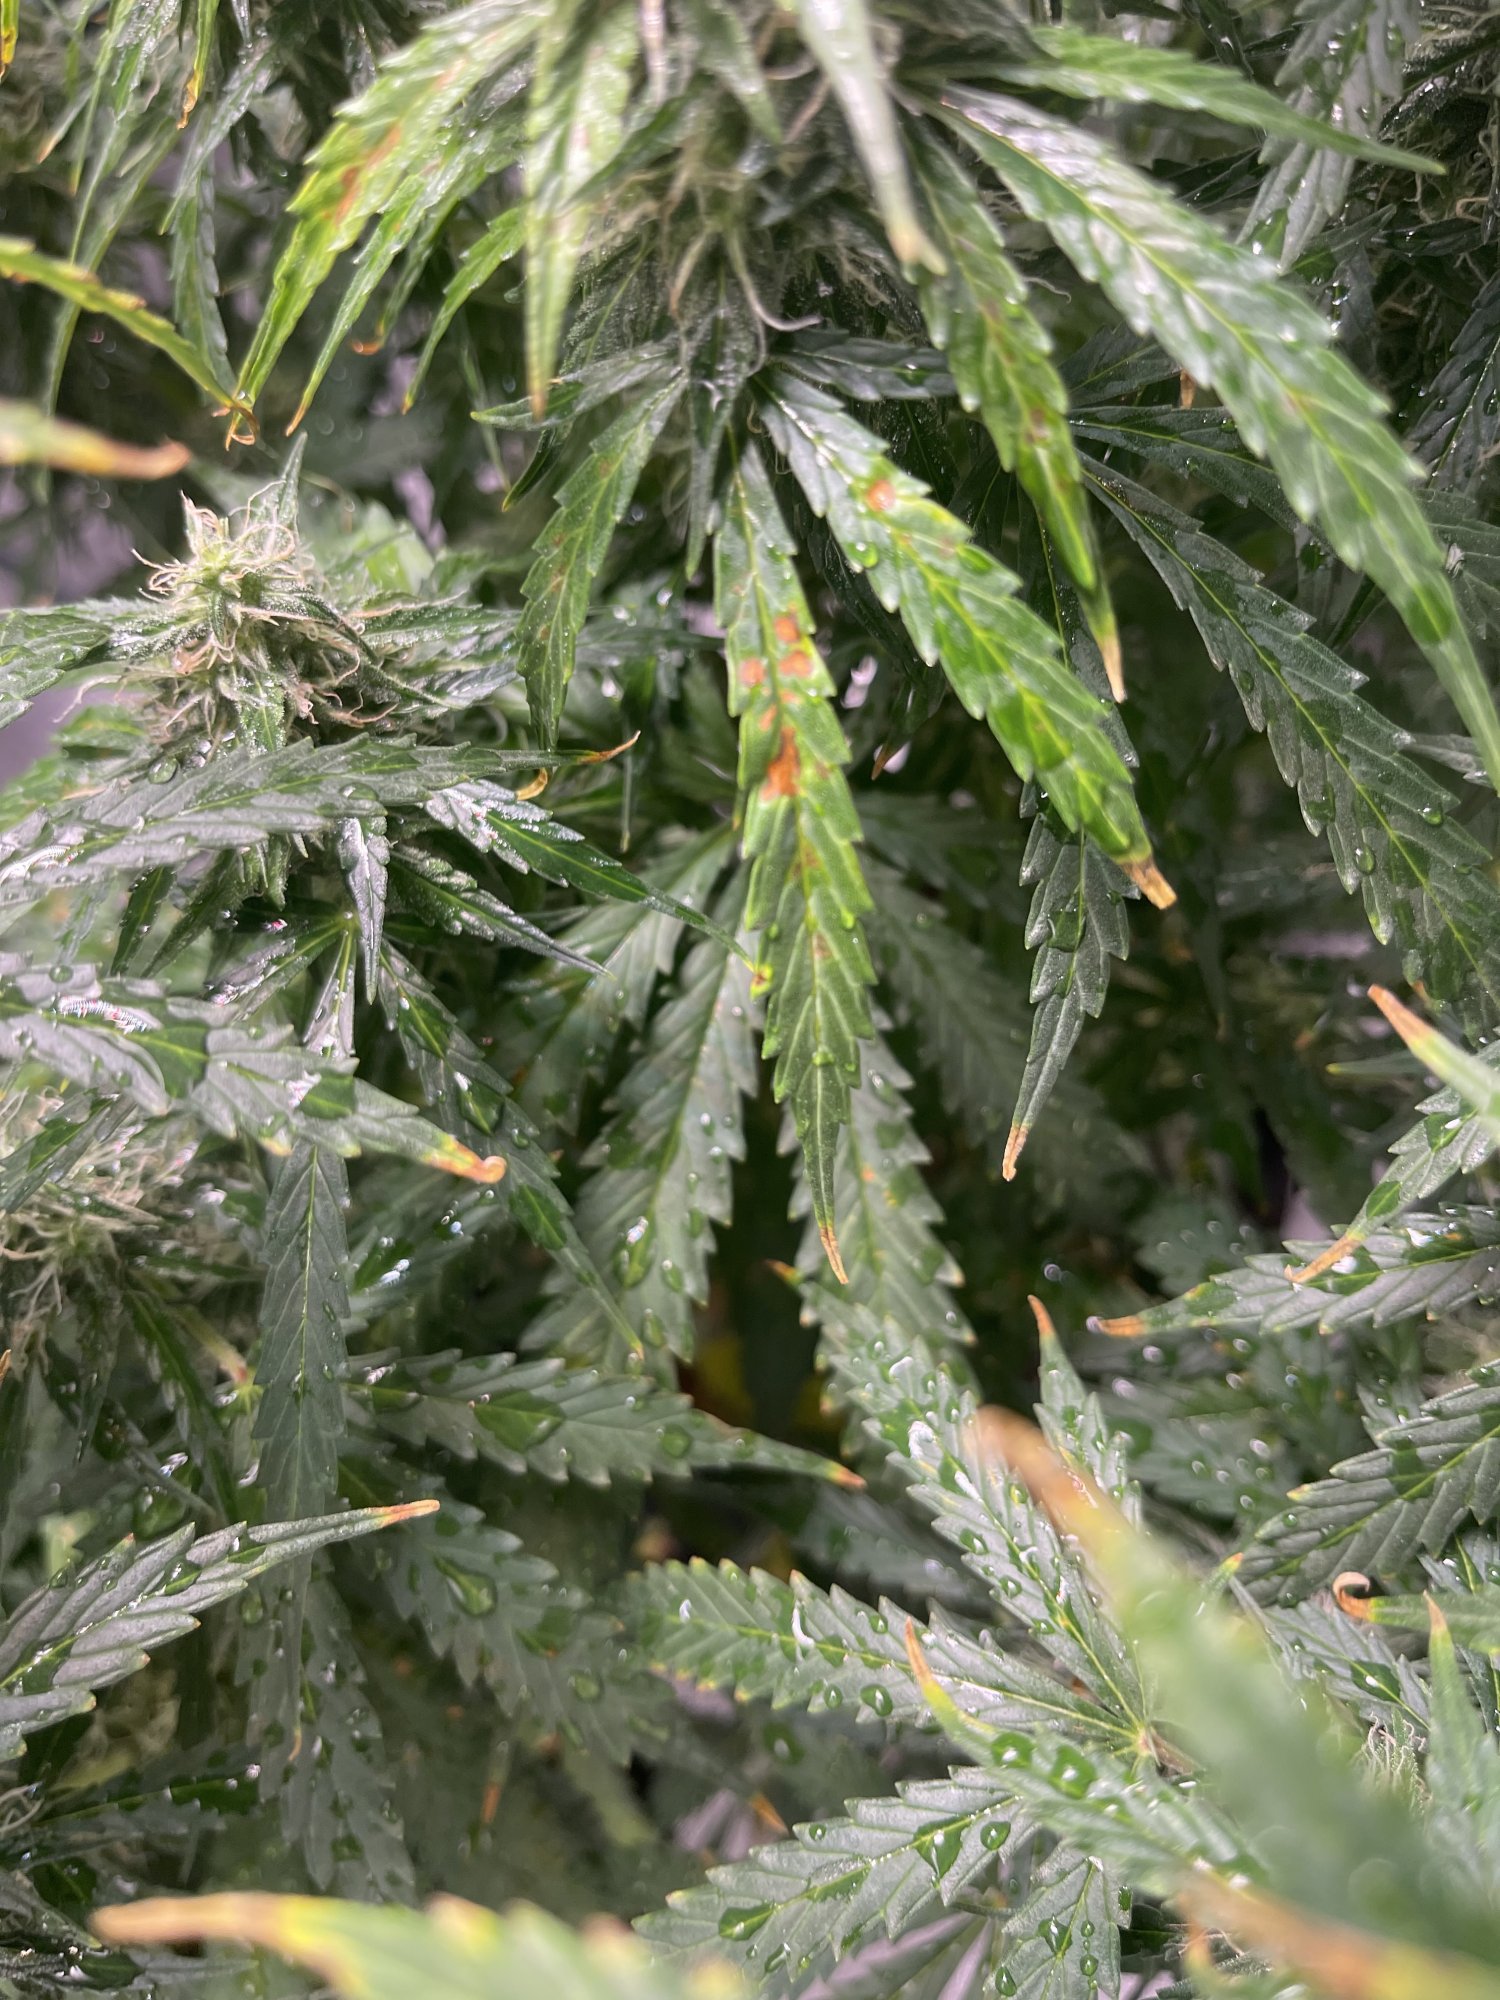 Northern lights autoflower brown spots and yellowing leaves help